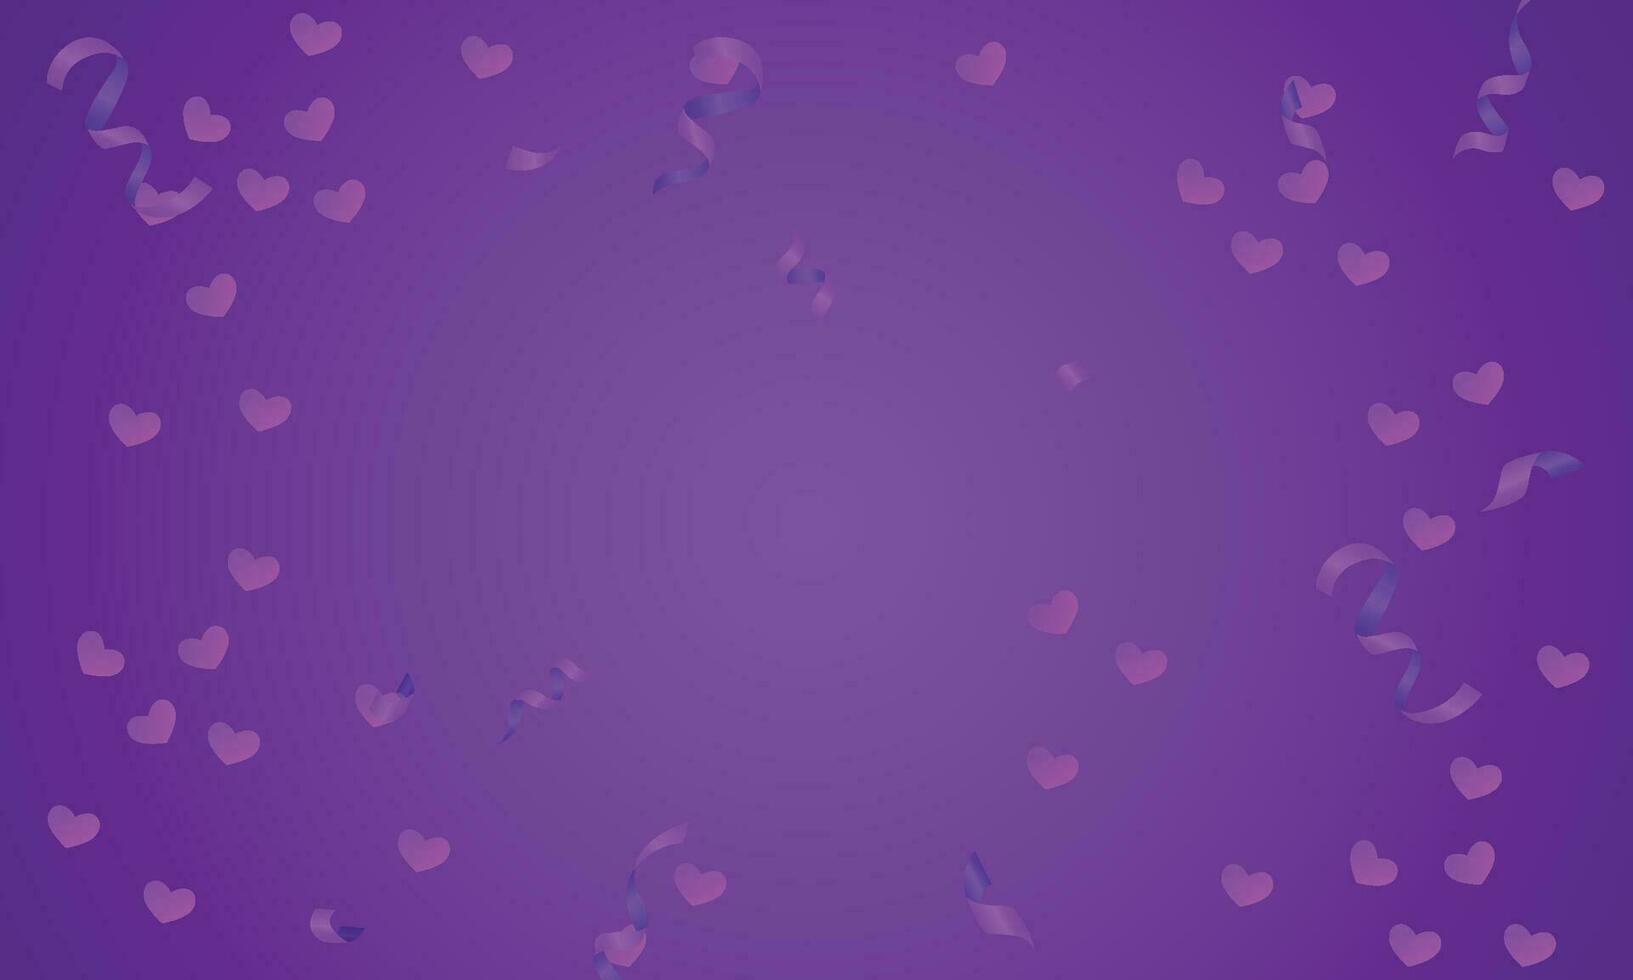 Vector valentines day background with hearts purple ribbons design